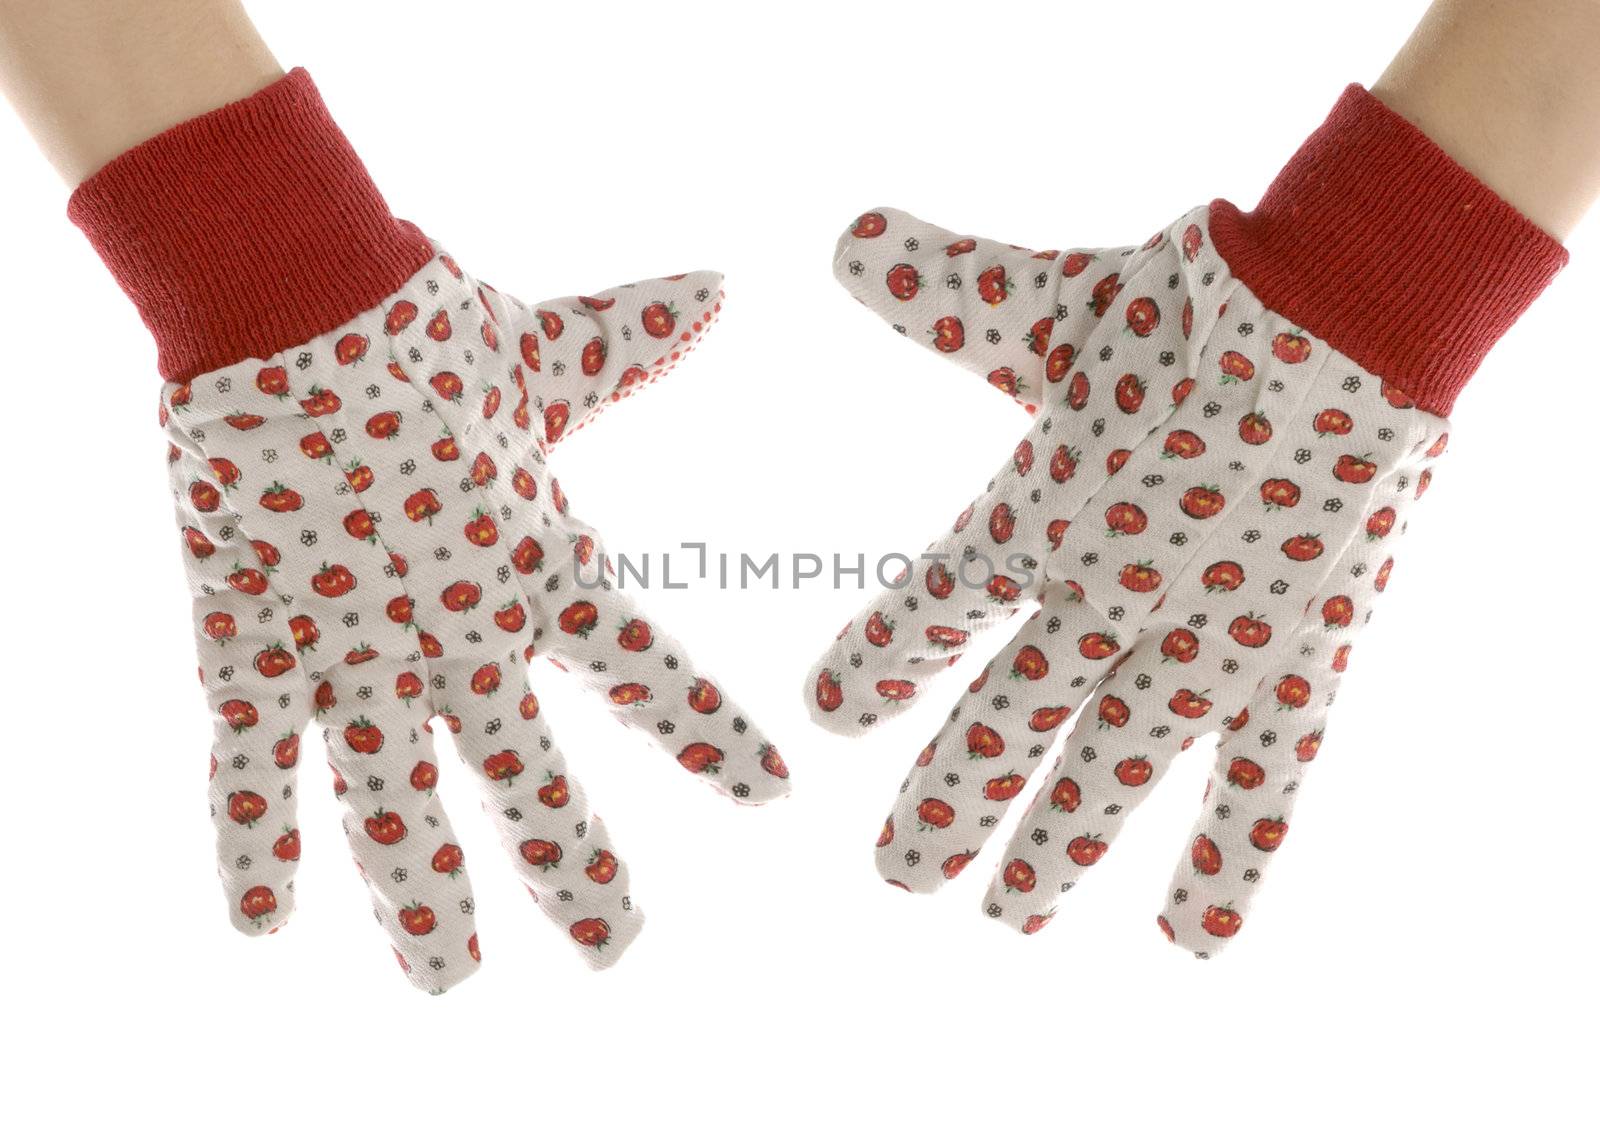 gardening gloves by willeecole123